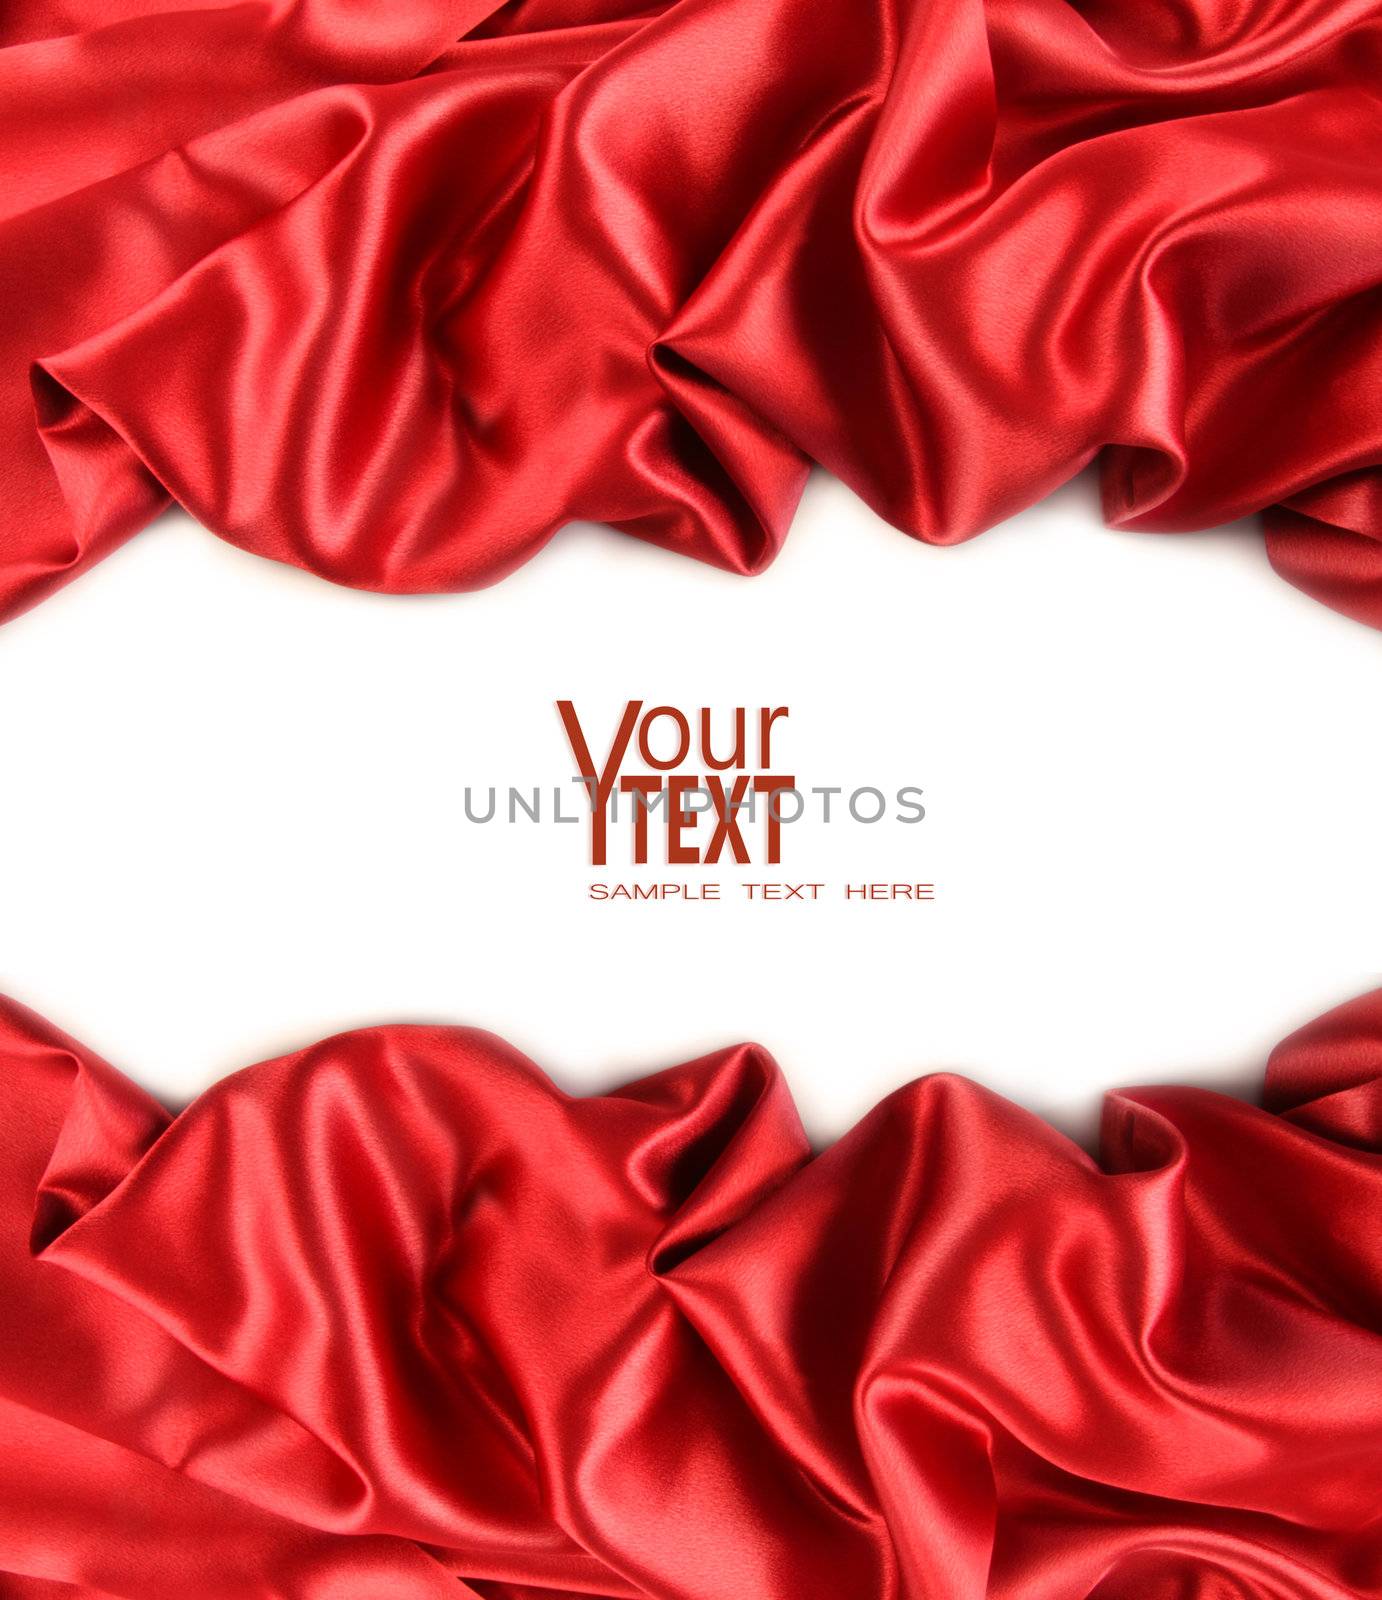 Red satin fabric against white background